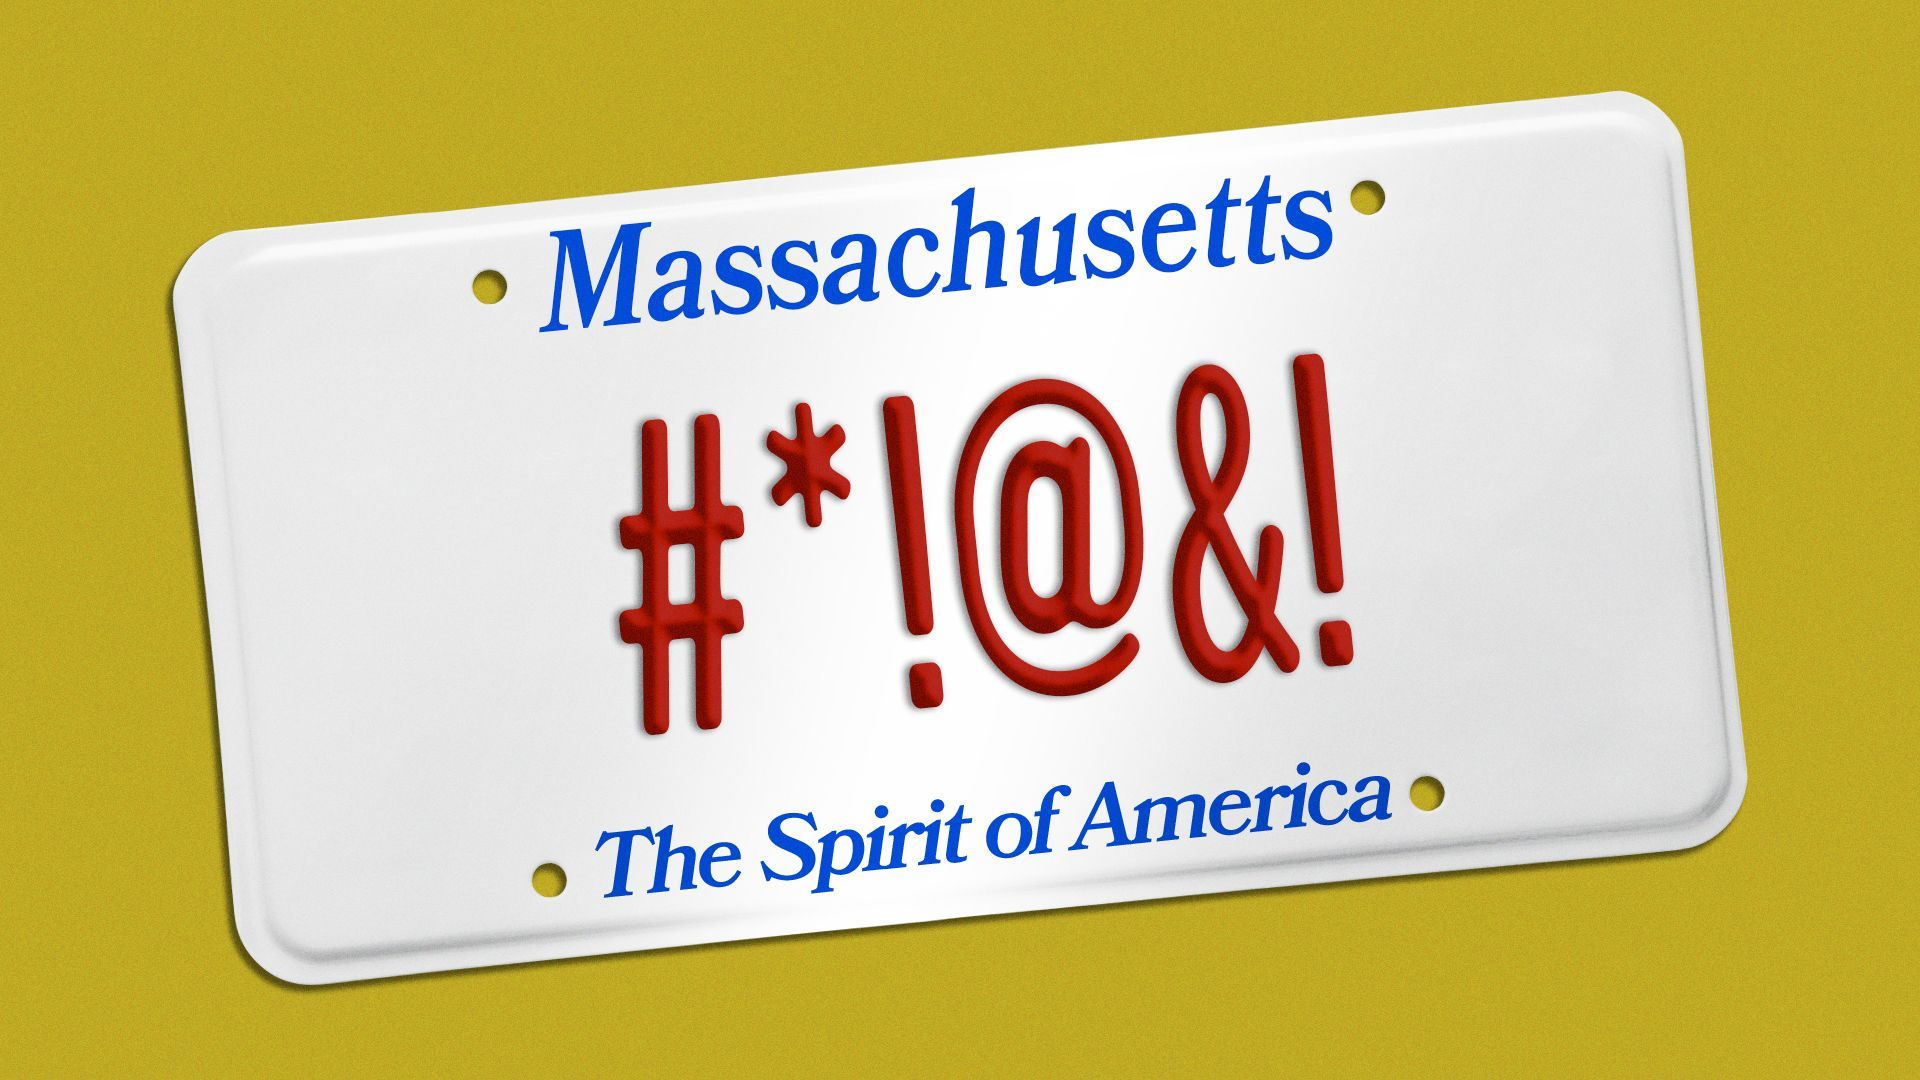 Illustration of a Massachusetts vanity license plate with symbols implying a swear word.